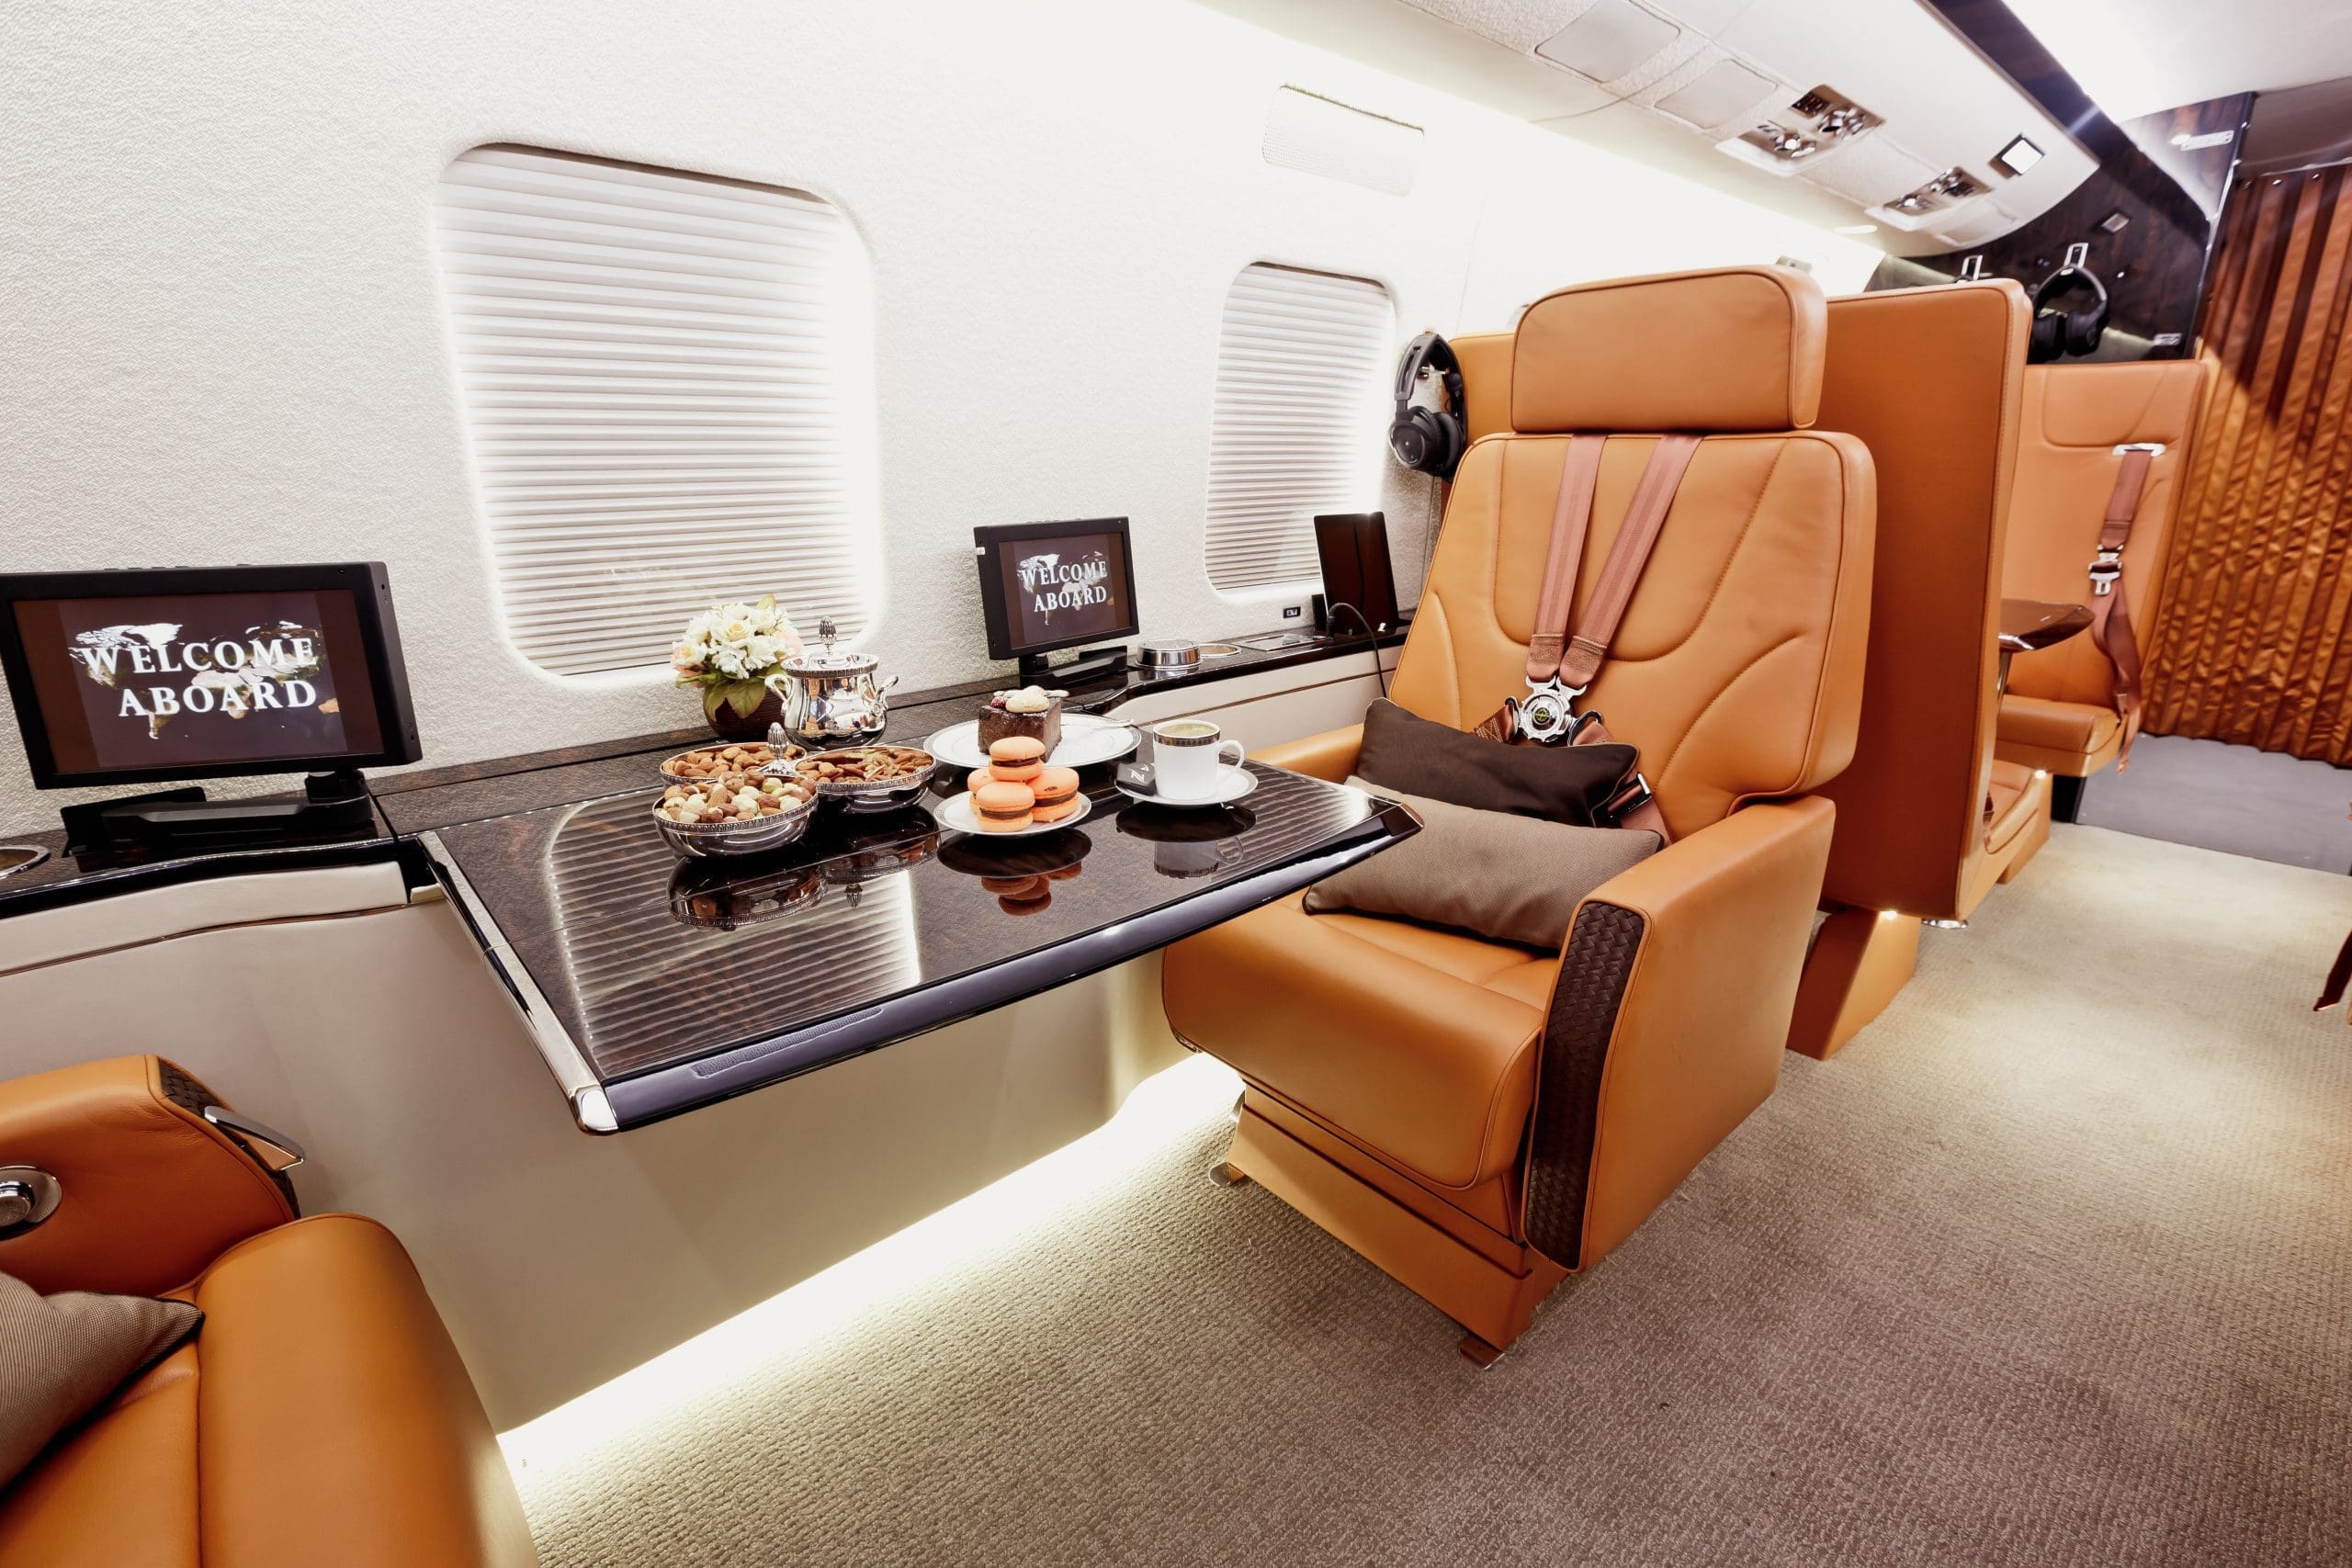 Private,Plane,Interior,With,Wooden,Tables,And,Leather,Seats